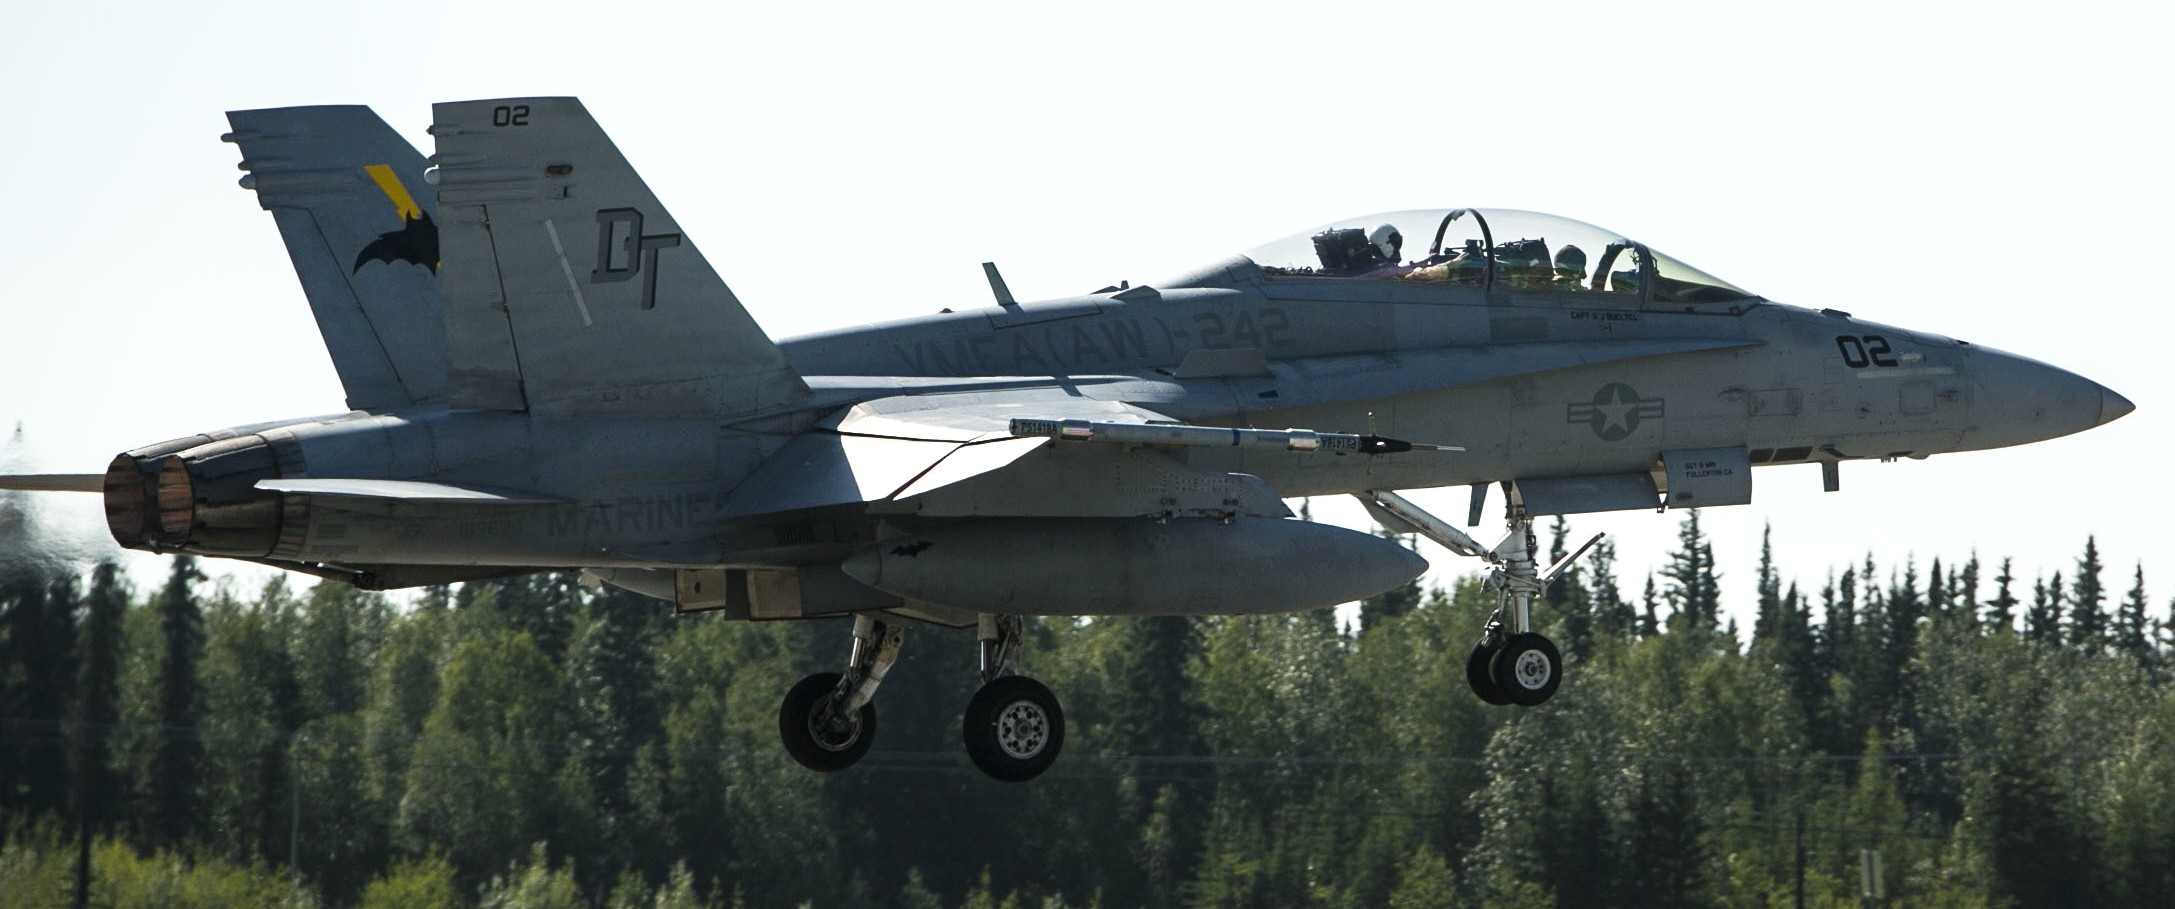 vmfa(aw)-242 bats marine all-weather fighter attack squadron usmc f/a-18d hornet 42 northern edge eielson afb alaska